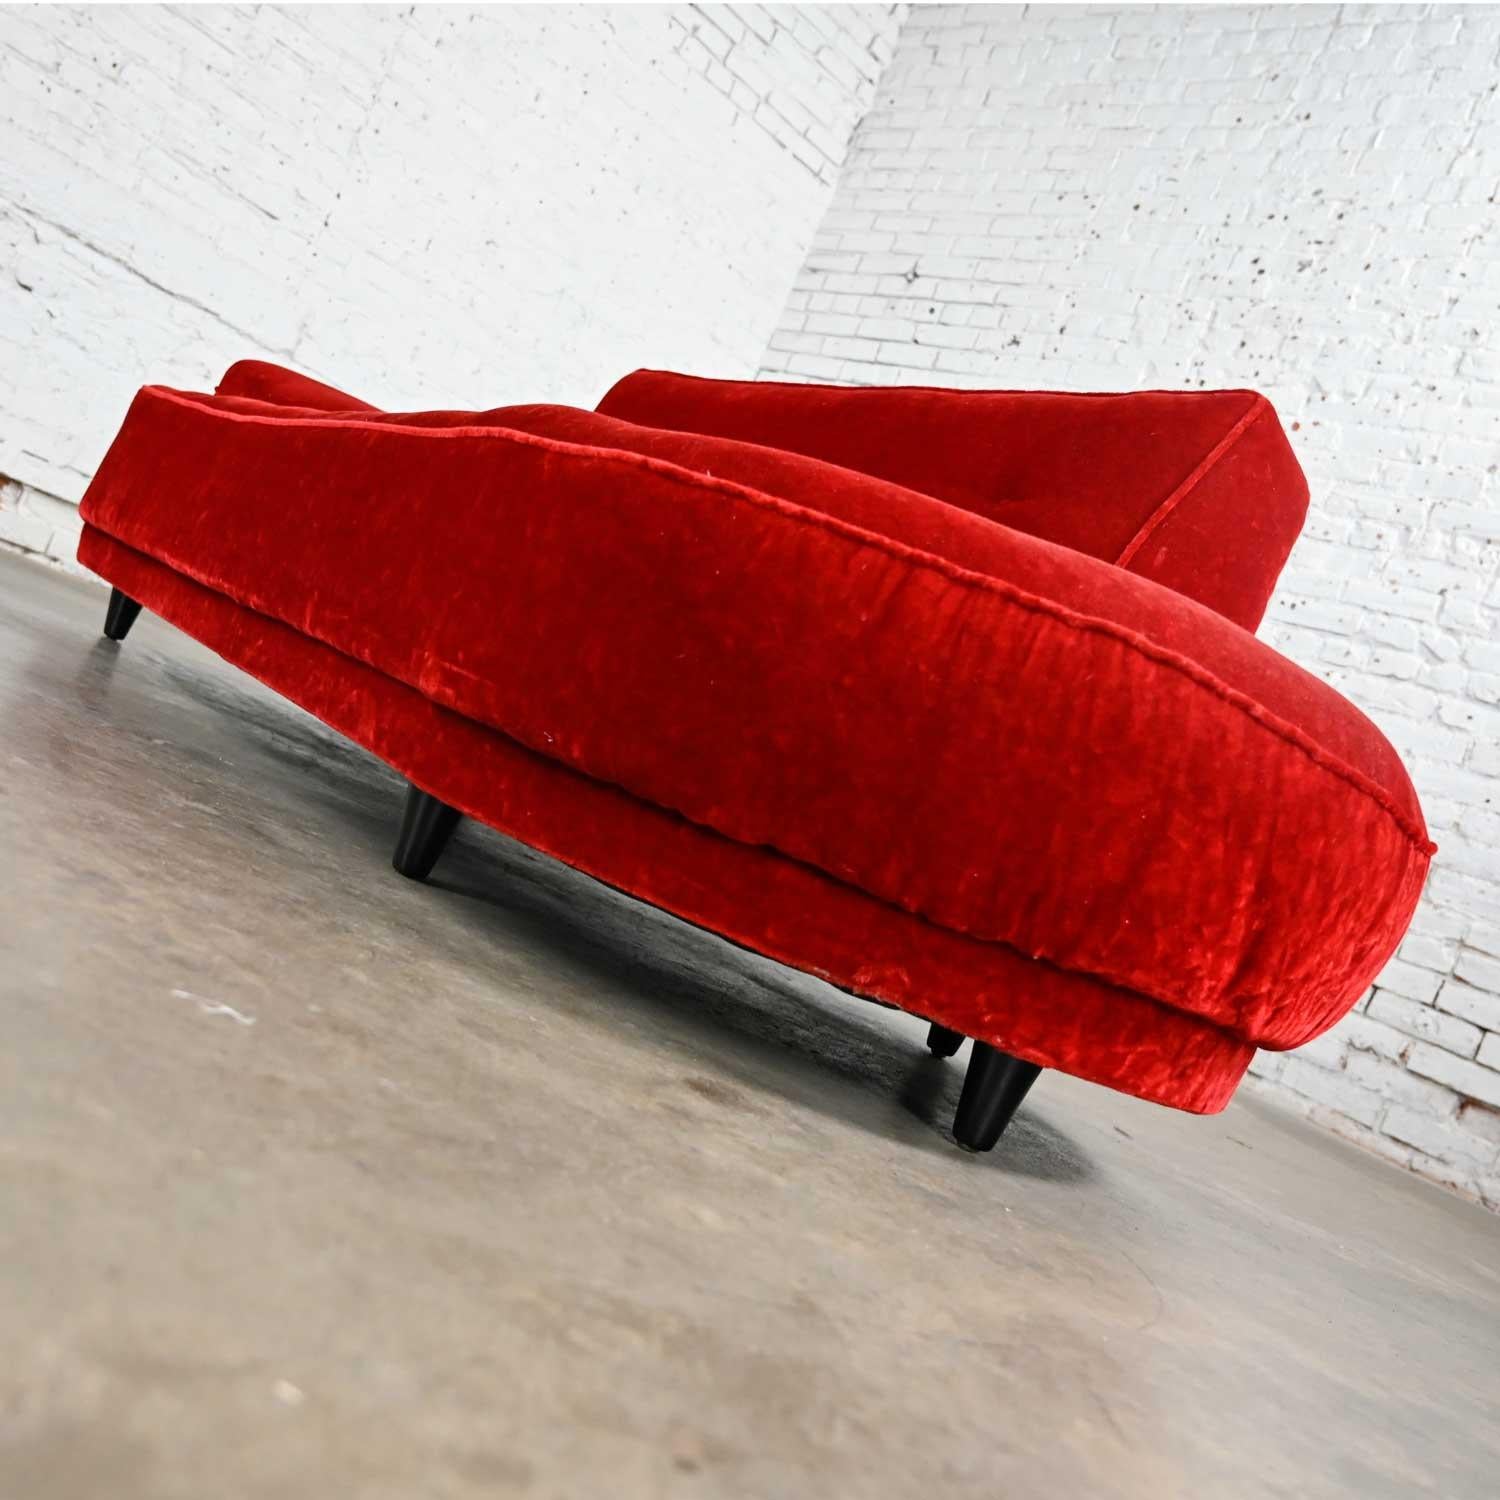 Mid Century Hollywood Regency Art Deco Style Crushed Red Velvet Chaise Lounge 2